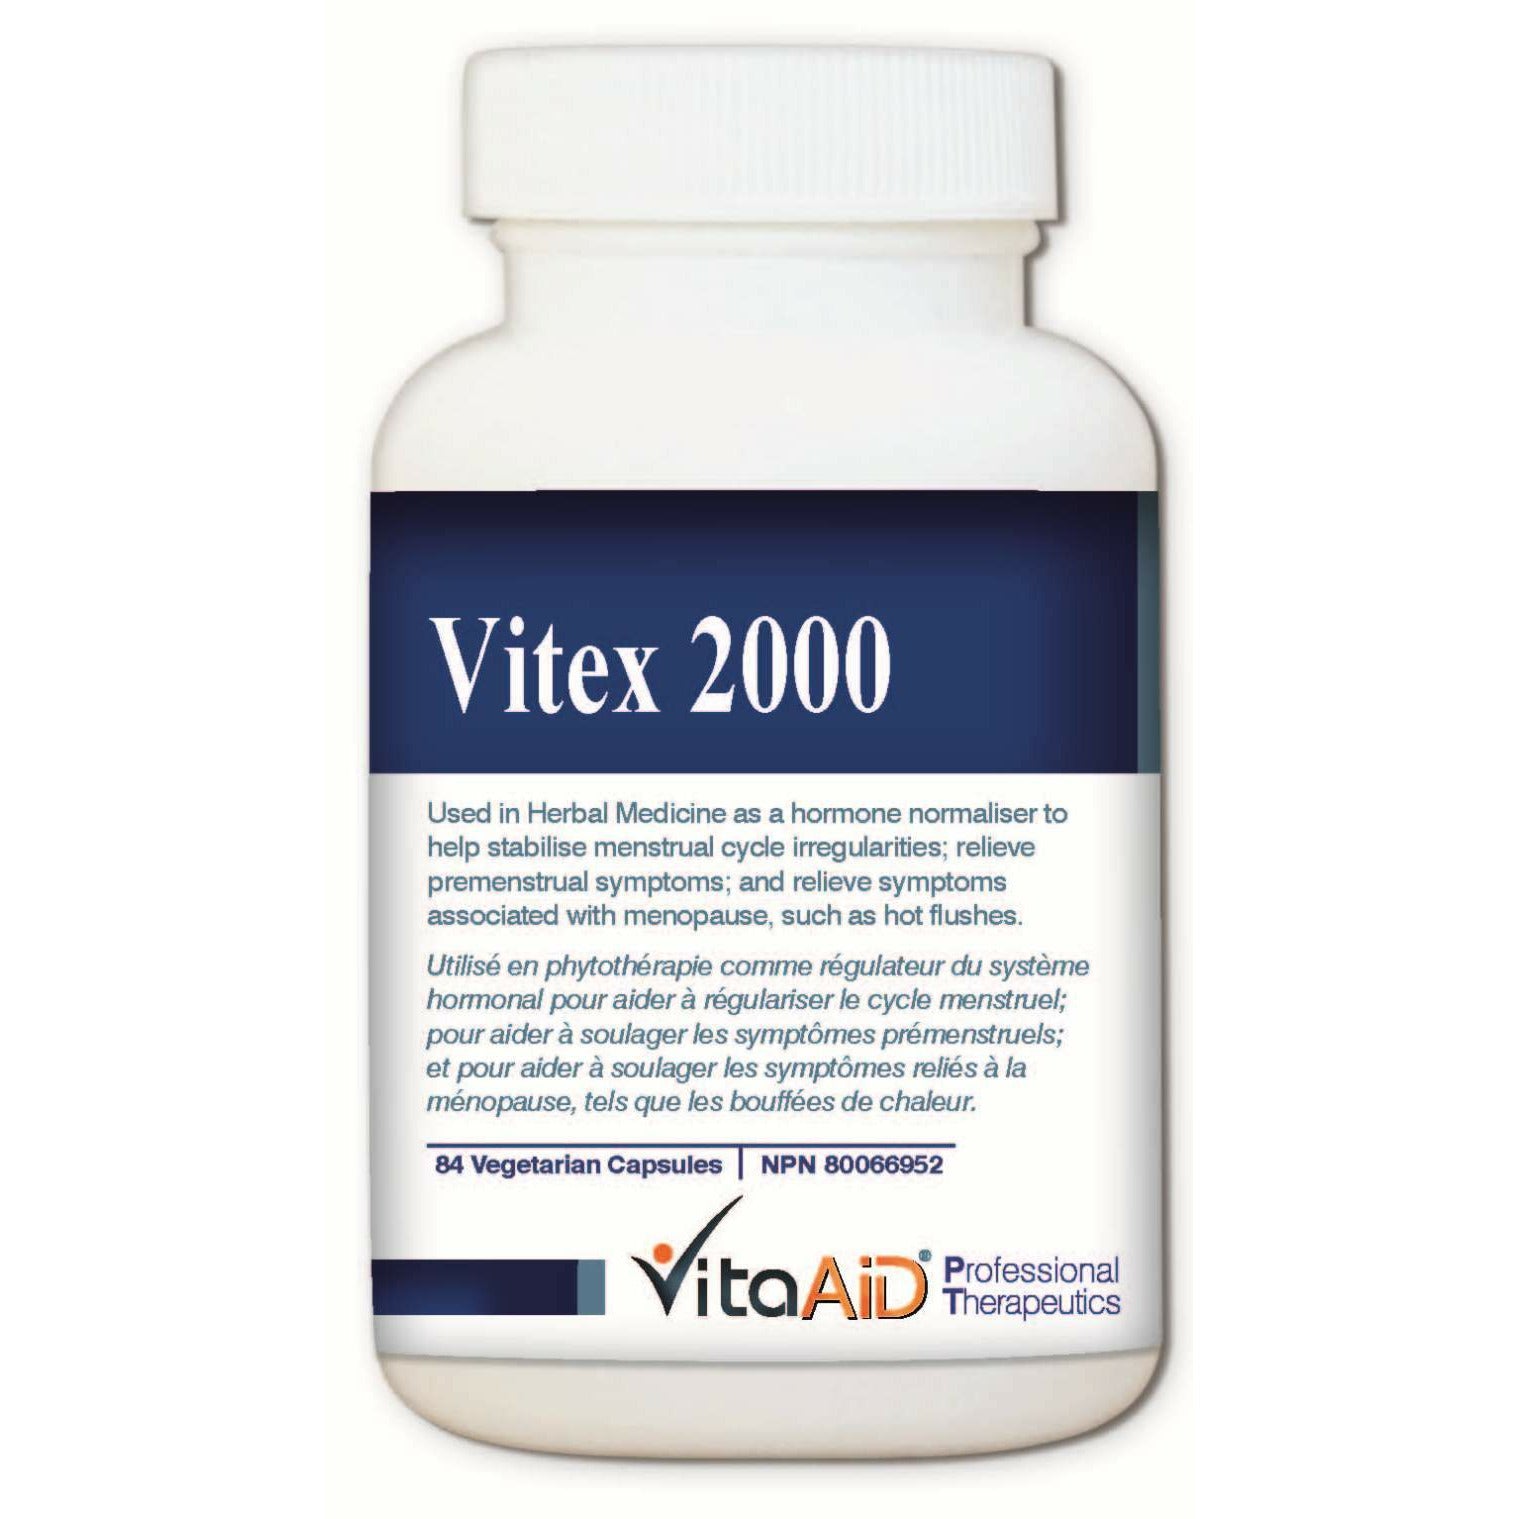 Vitex 2000 Herbal Progesterone Support 84 vcaps